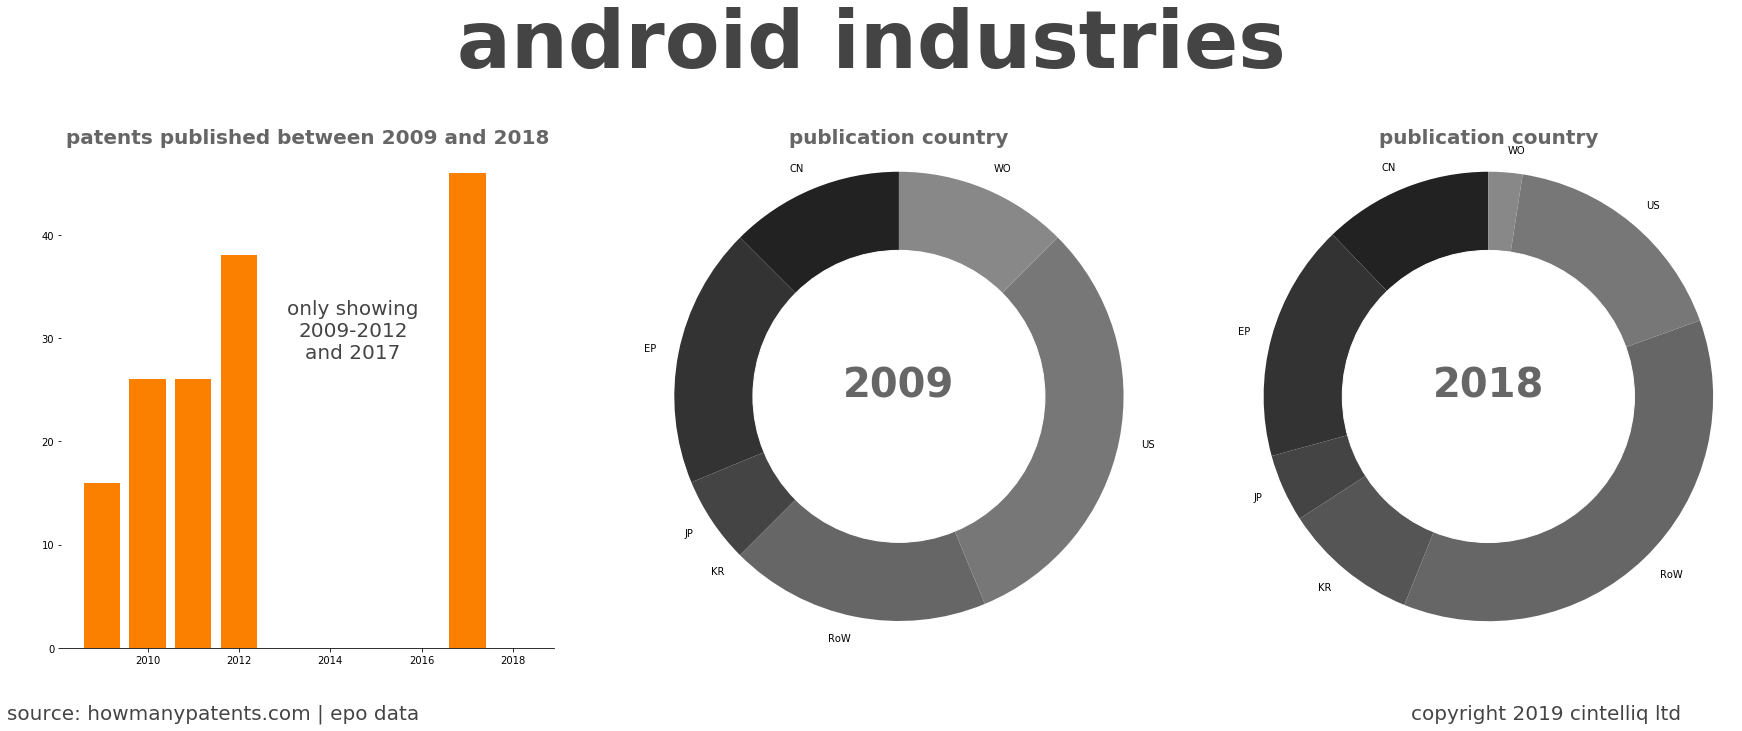 summary of patents for Android Industries